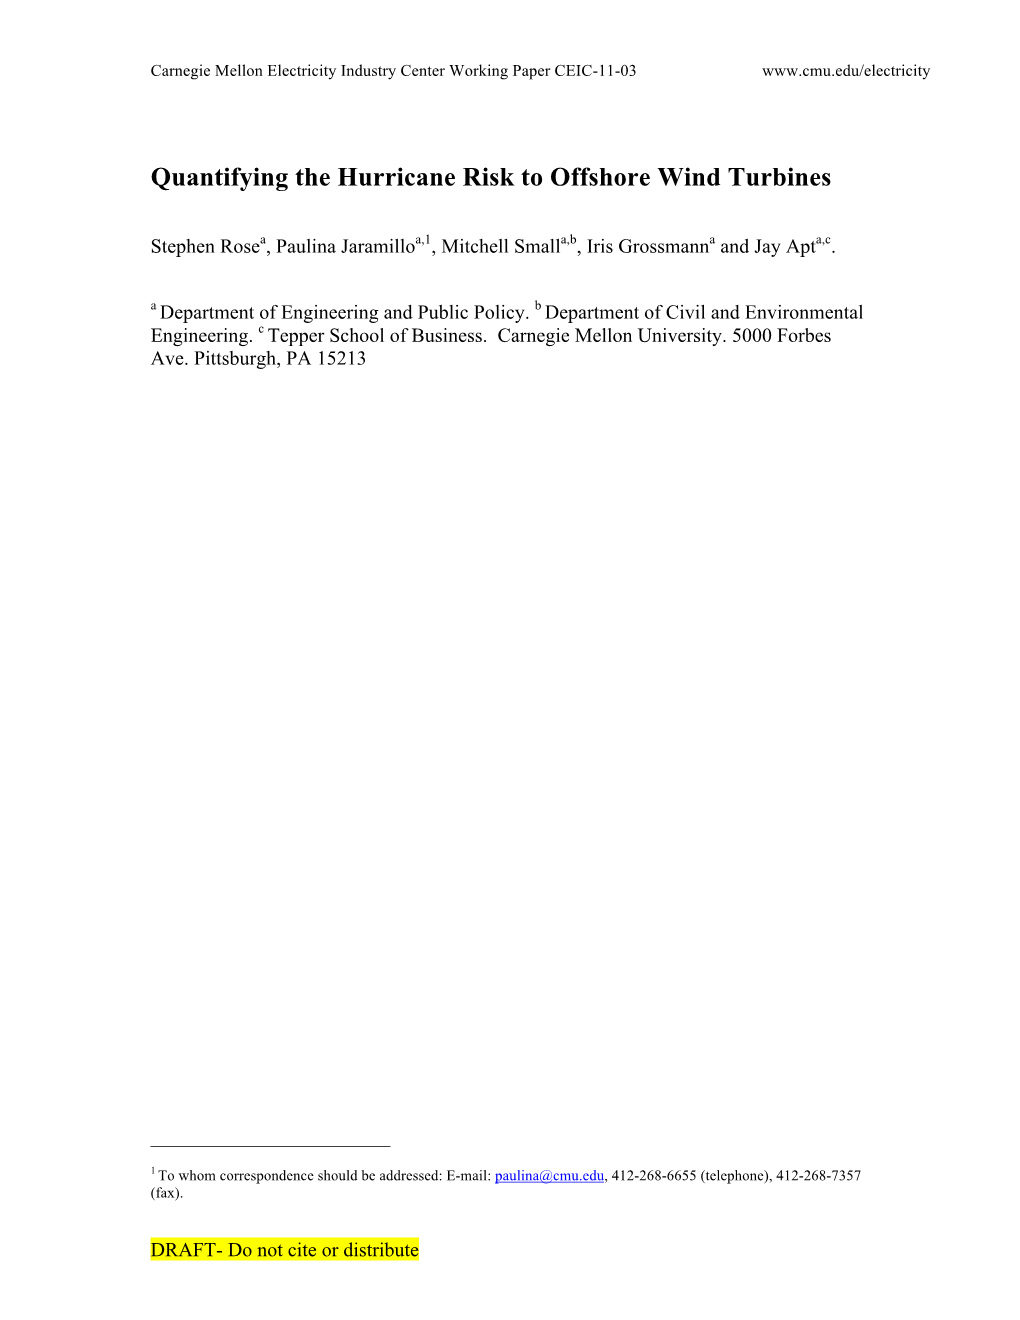 Quantifying the Hurricane Risk to Offshore Wind Turbines